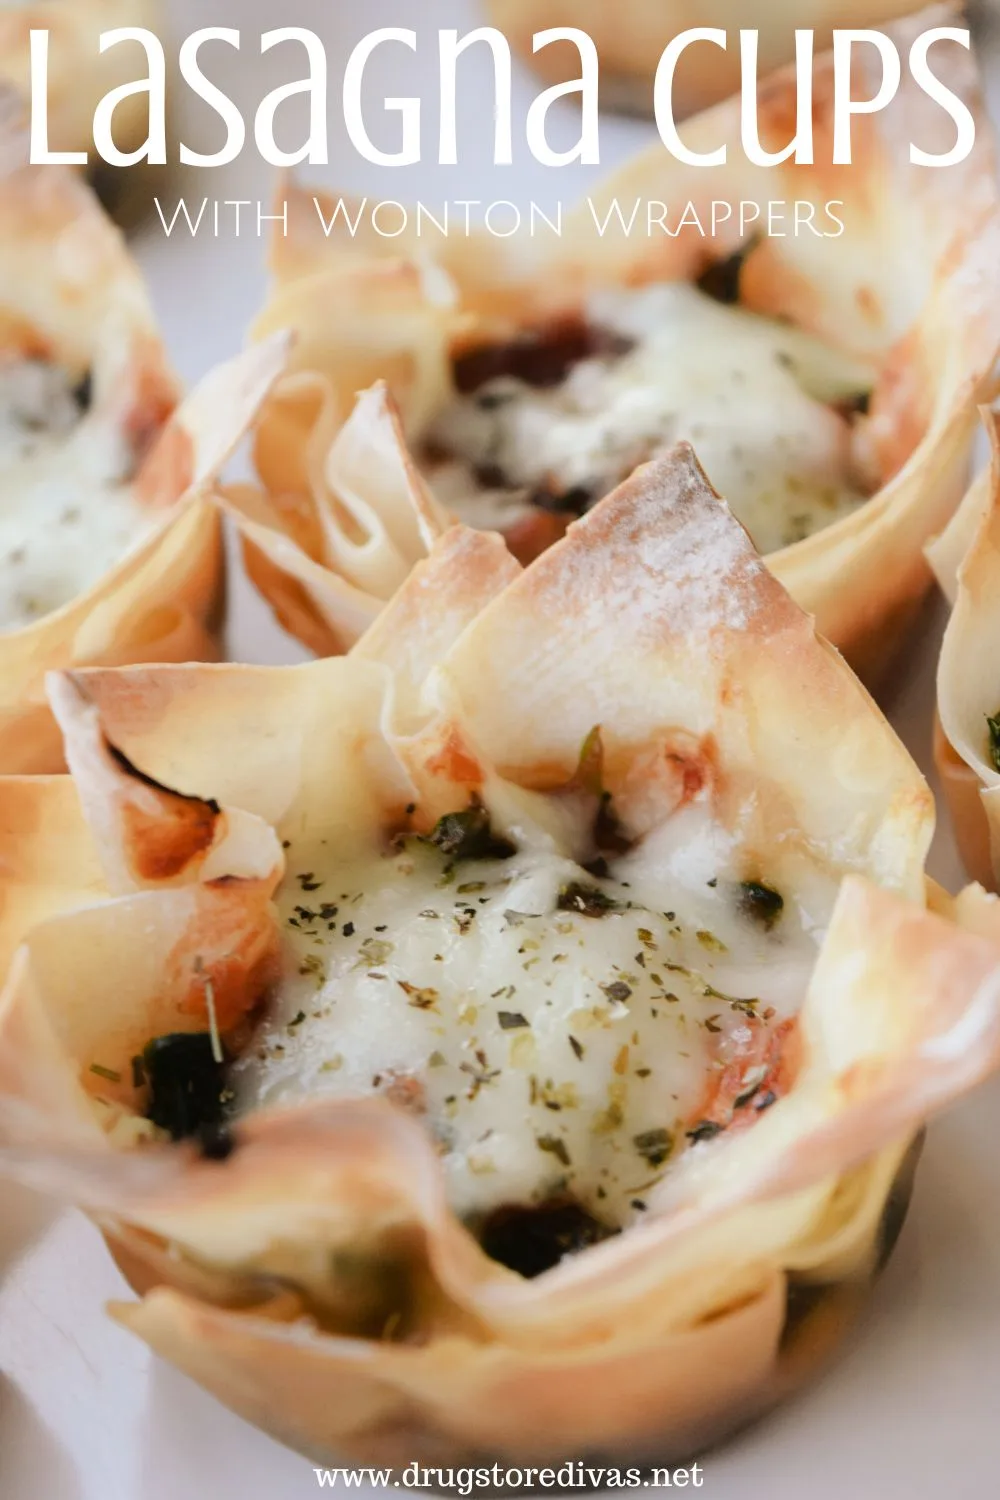 Four mini lasagna cupcakes in wonton wrappers with the words 